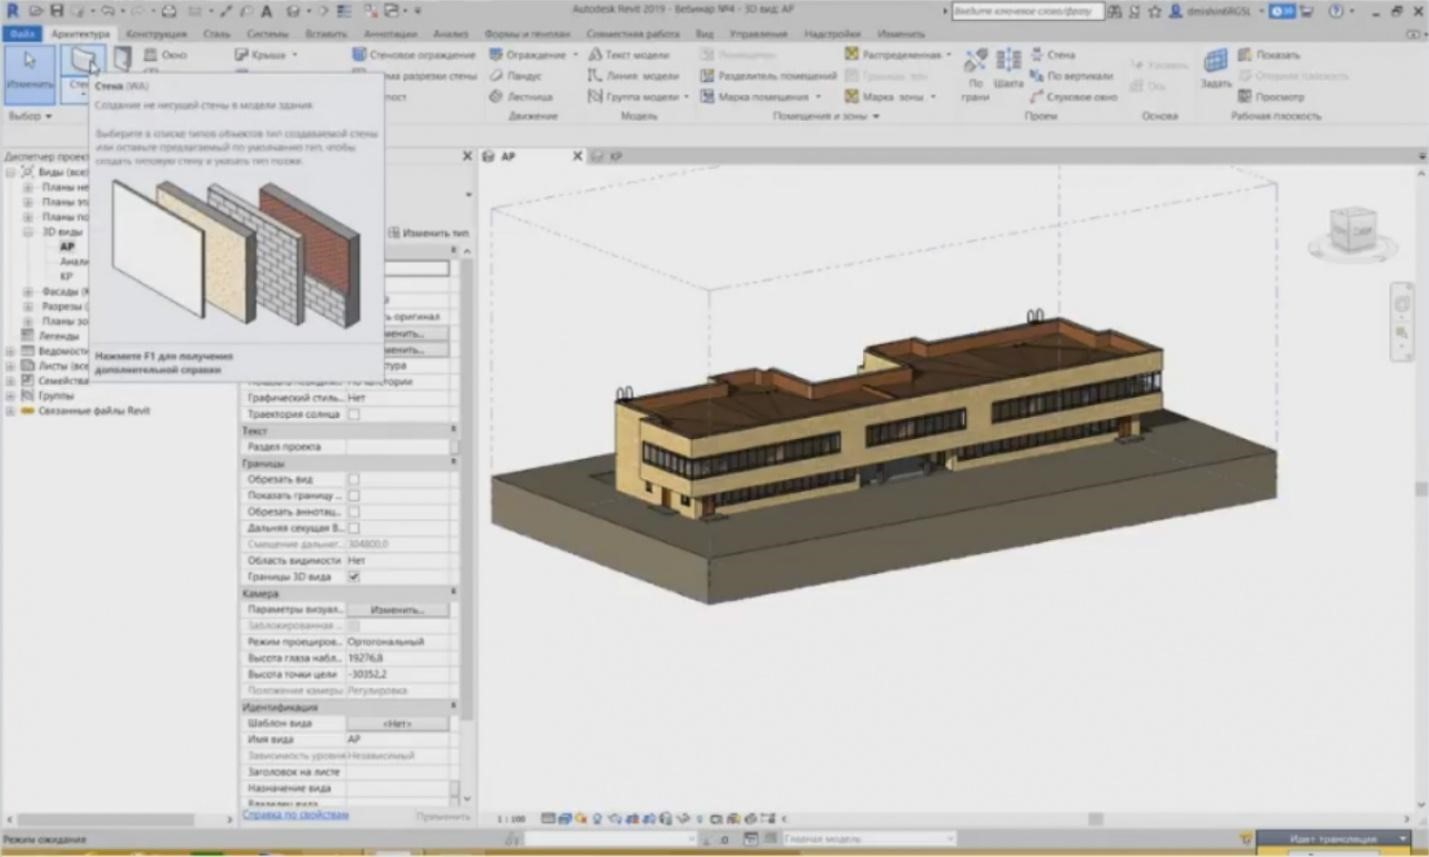 BIM DESIGN IN REVIT. CREATING ARCHITECTURAL AND STRUCTURAL ELEMENTS-2